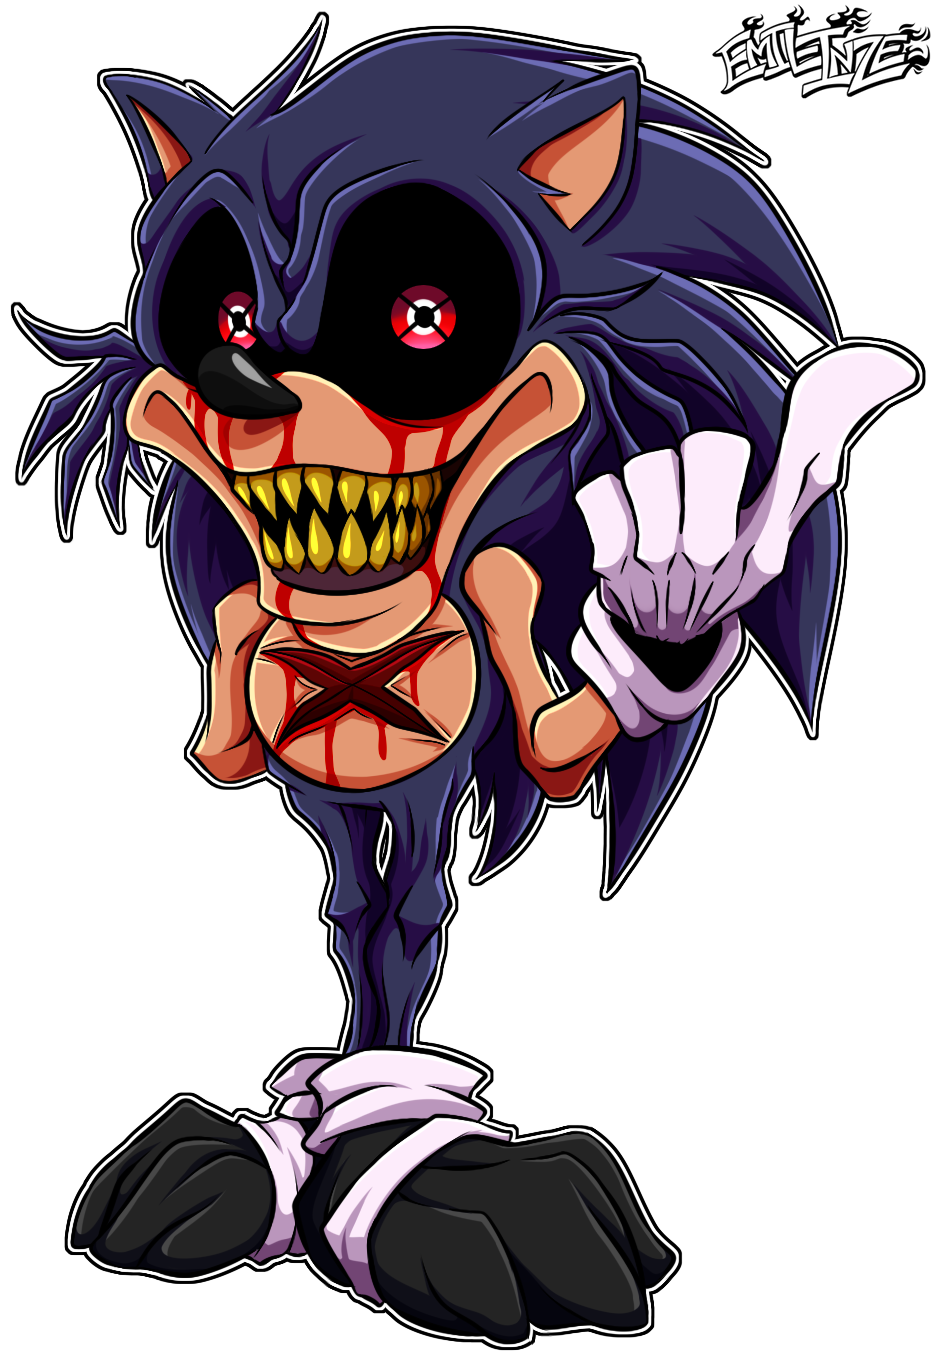 Lord X - Sonic PC Port by Slima11 on Newgrounds